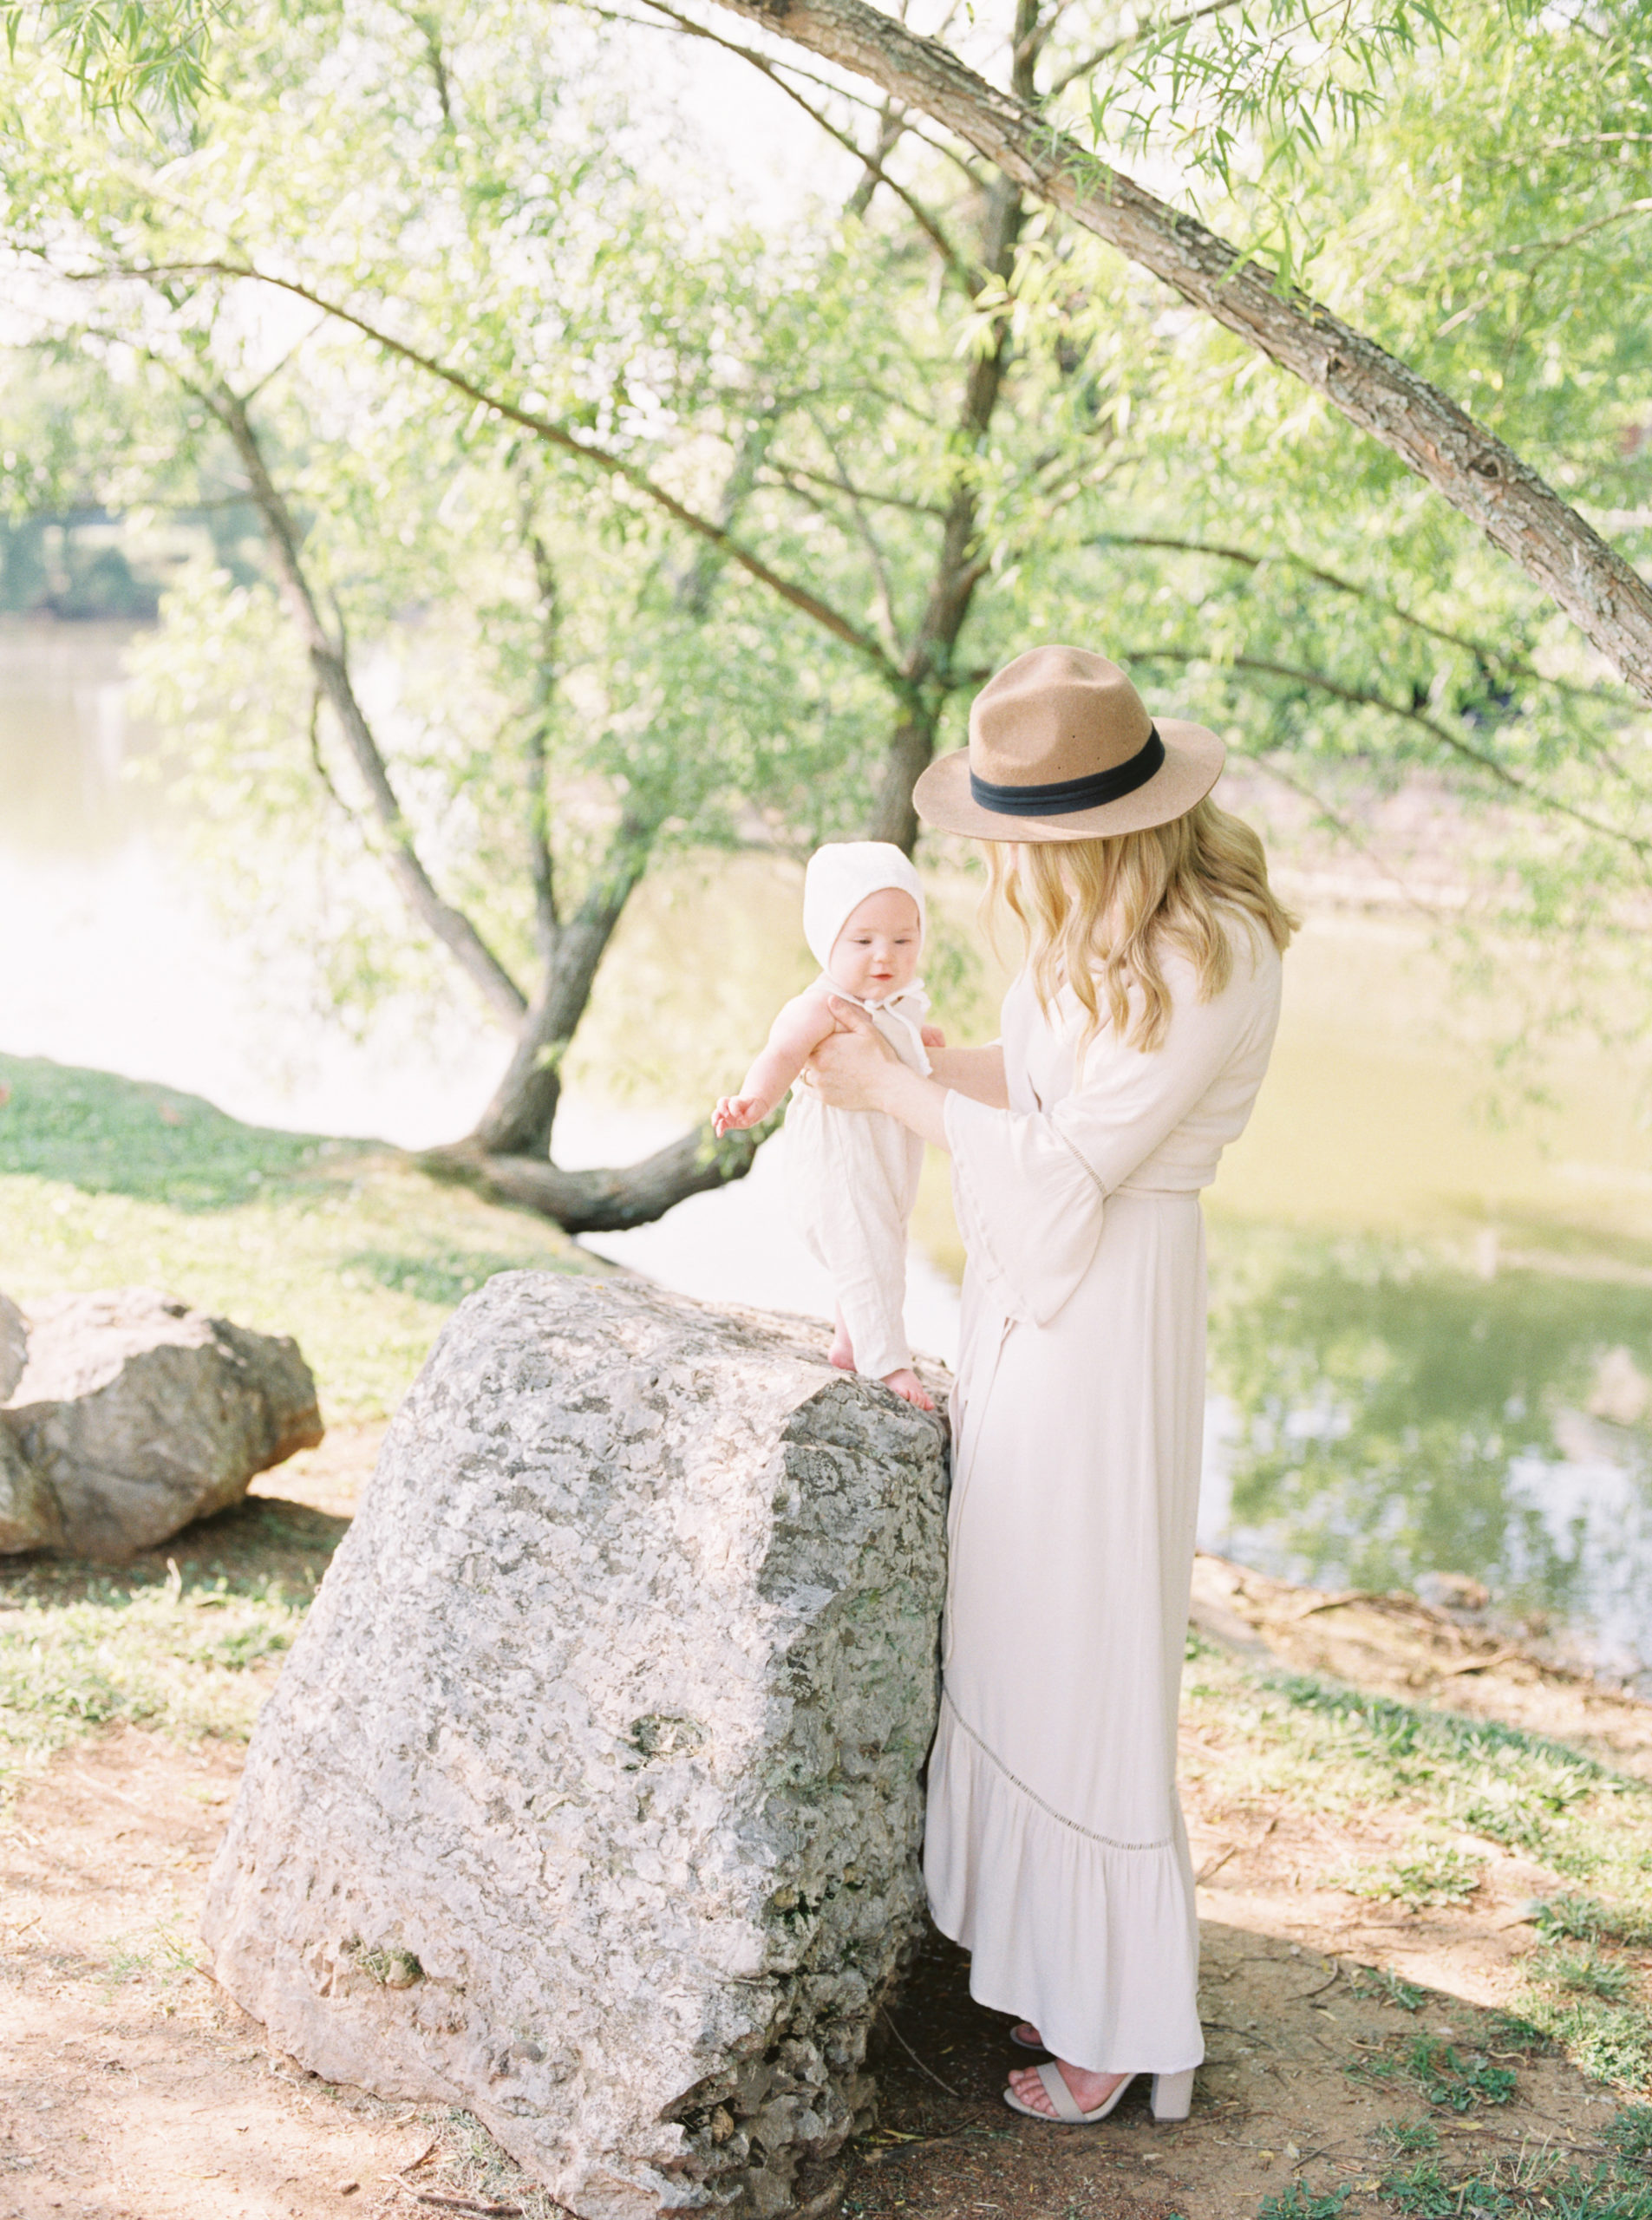 Olivia 7 Months Old - Sweet Williams Photography is a lifestyle, engagement, and wedding photographer serving the Nashville, Tennessee area, and destination locations.